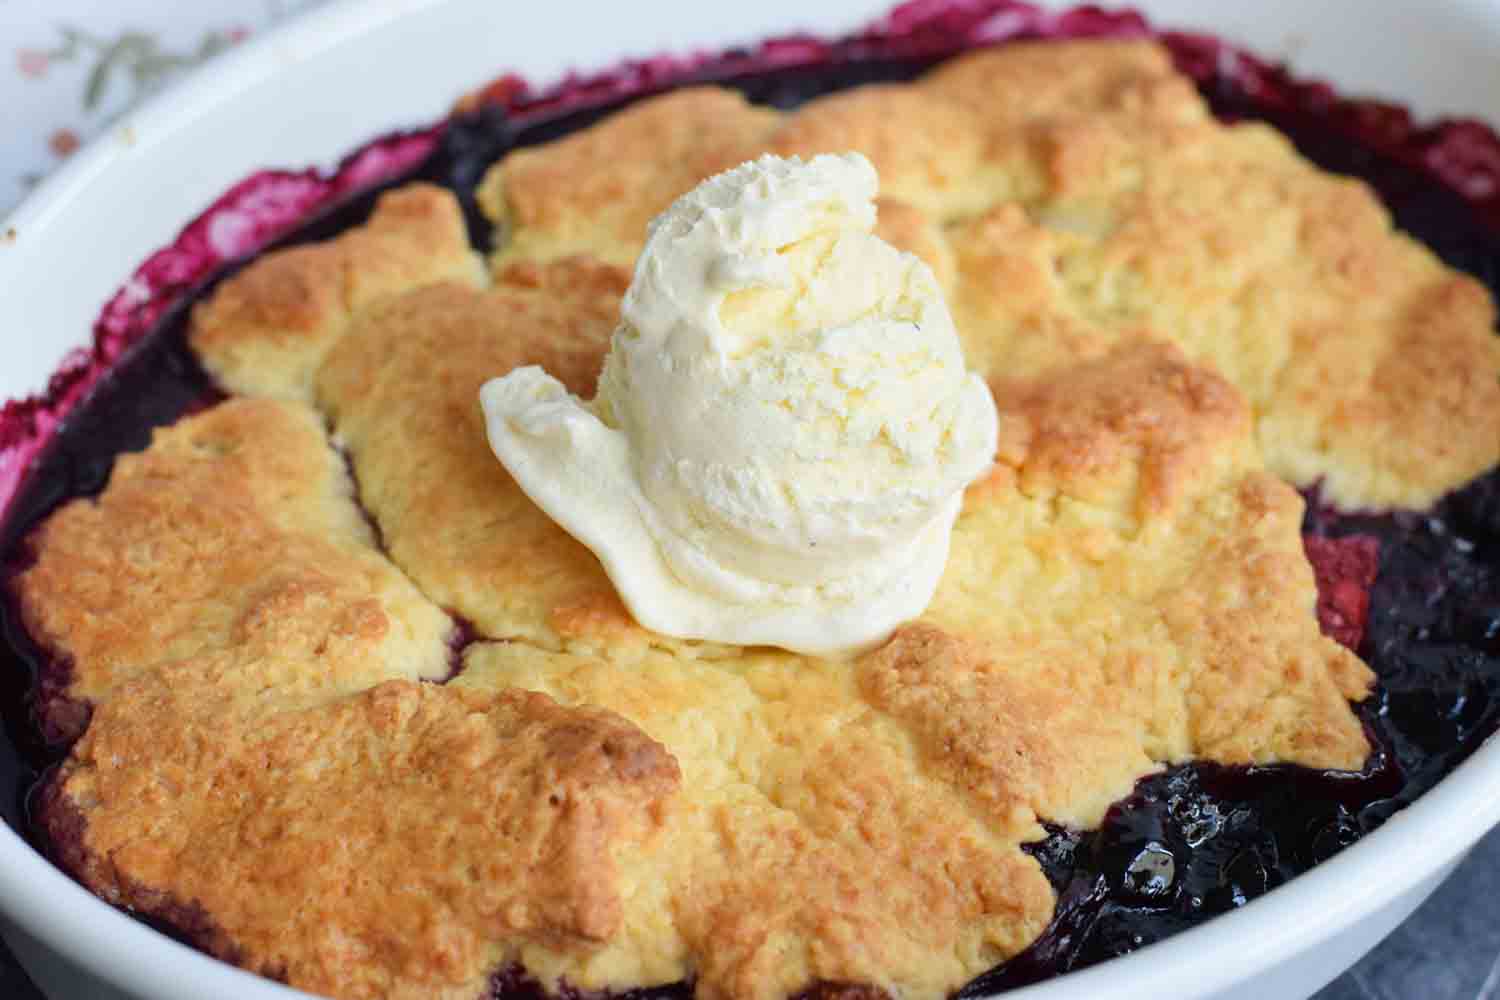 A dish with low FODMAP berry cobbler